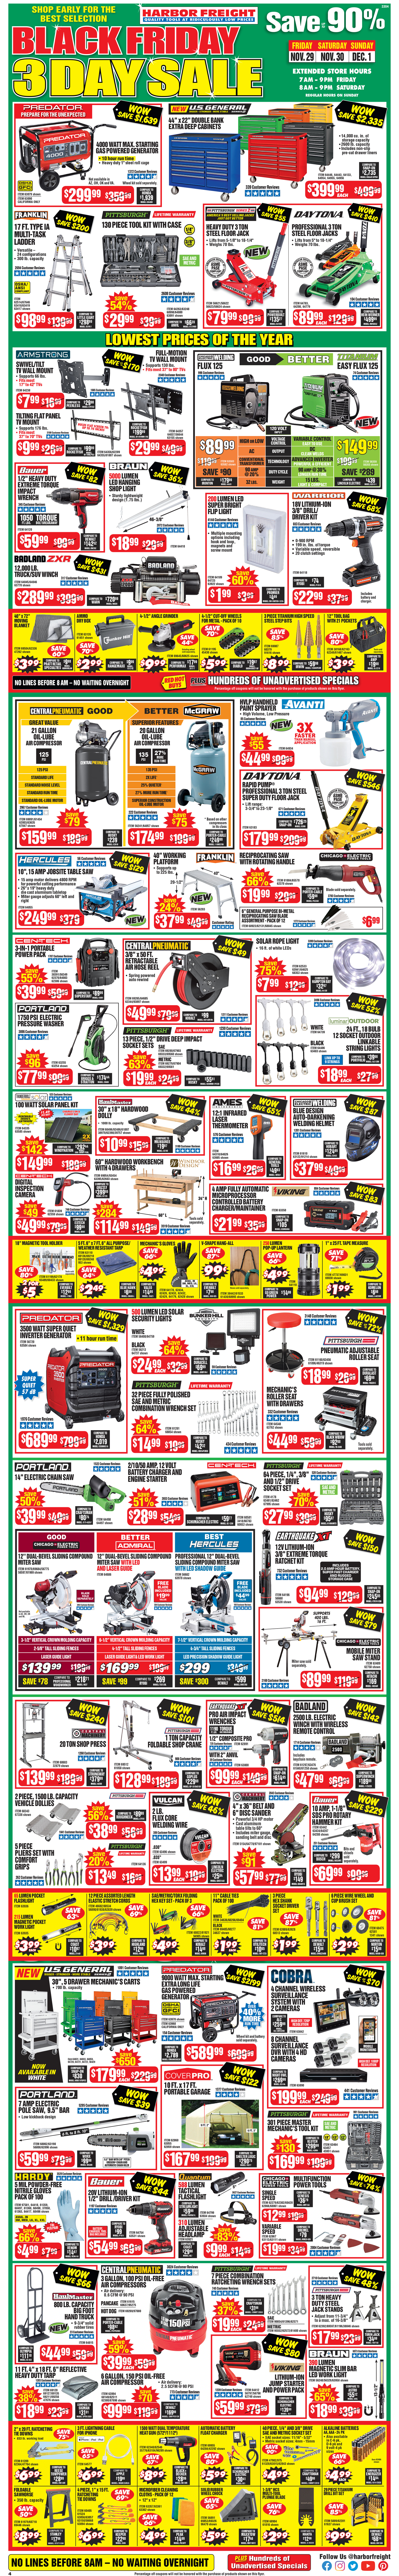 Black Friday Sale Harbor Freight Coupons